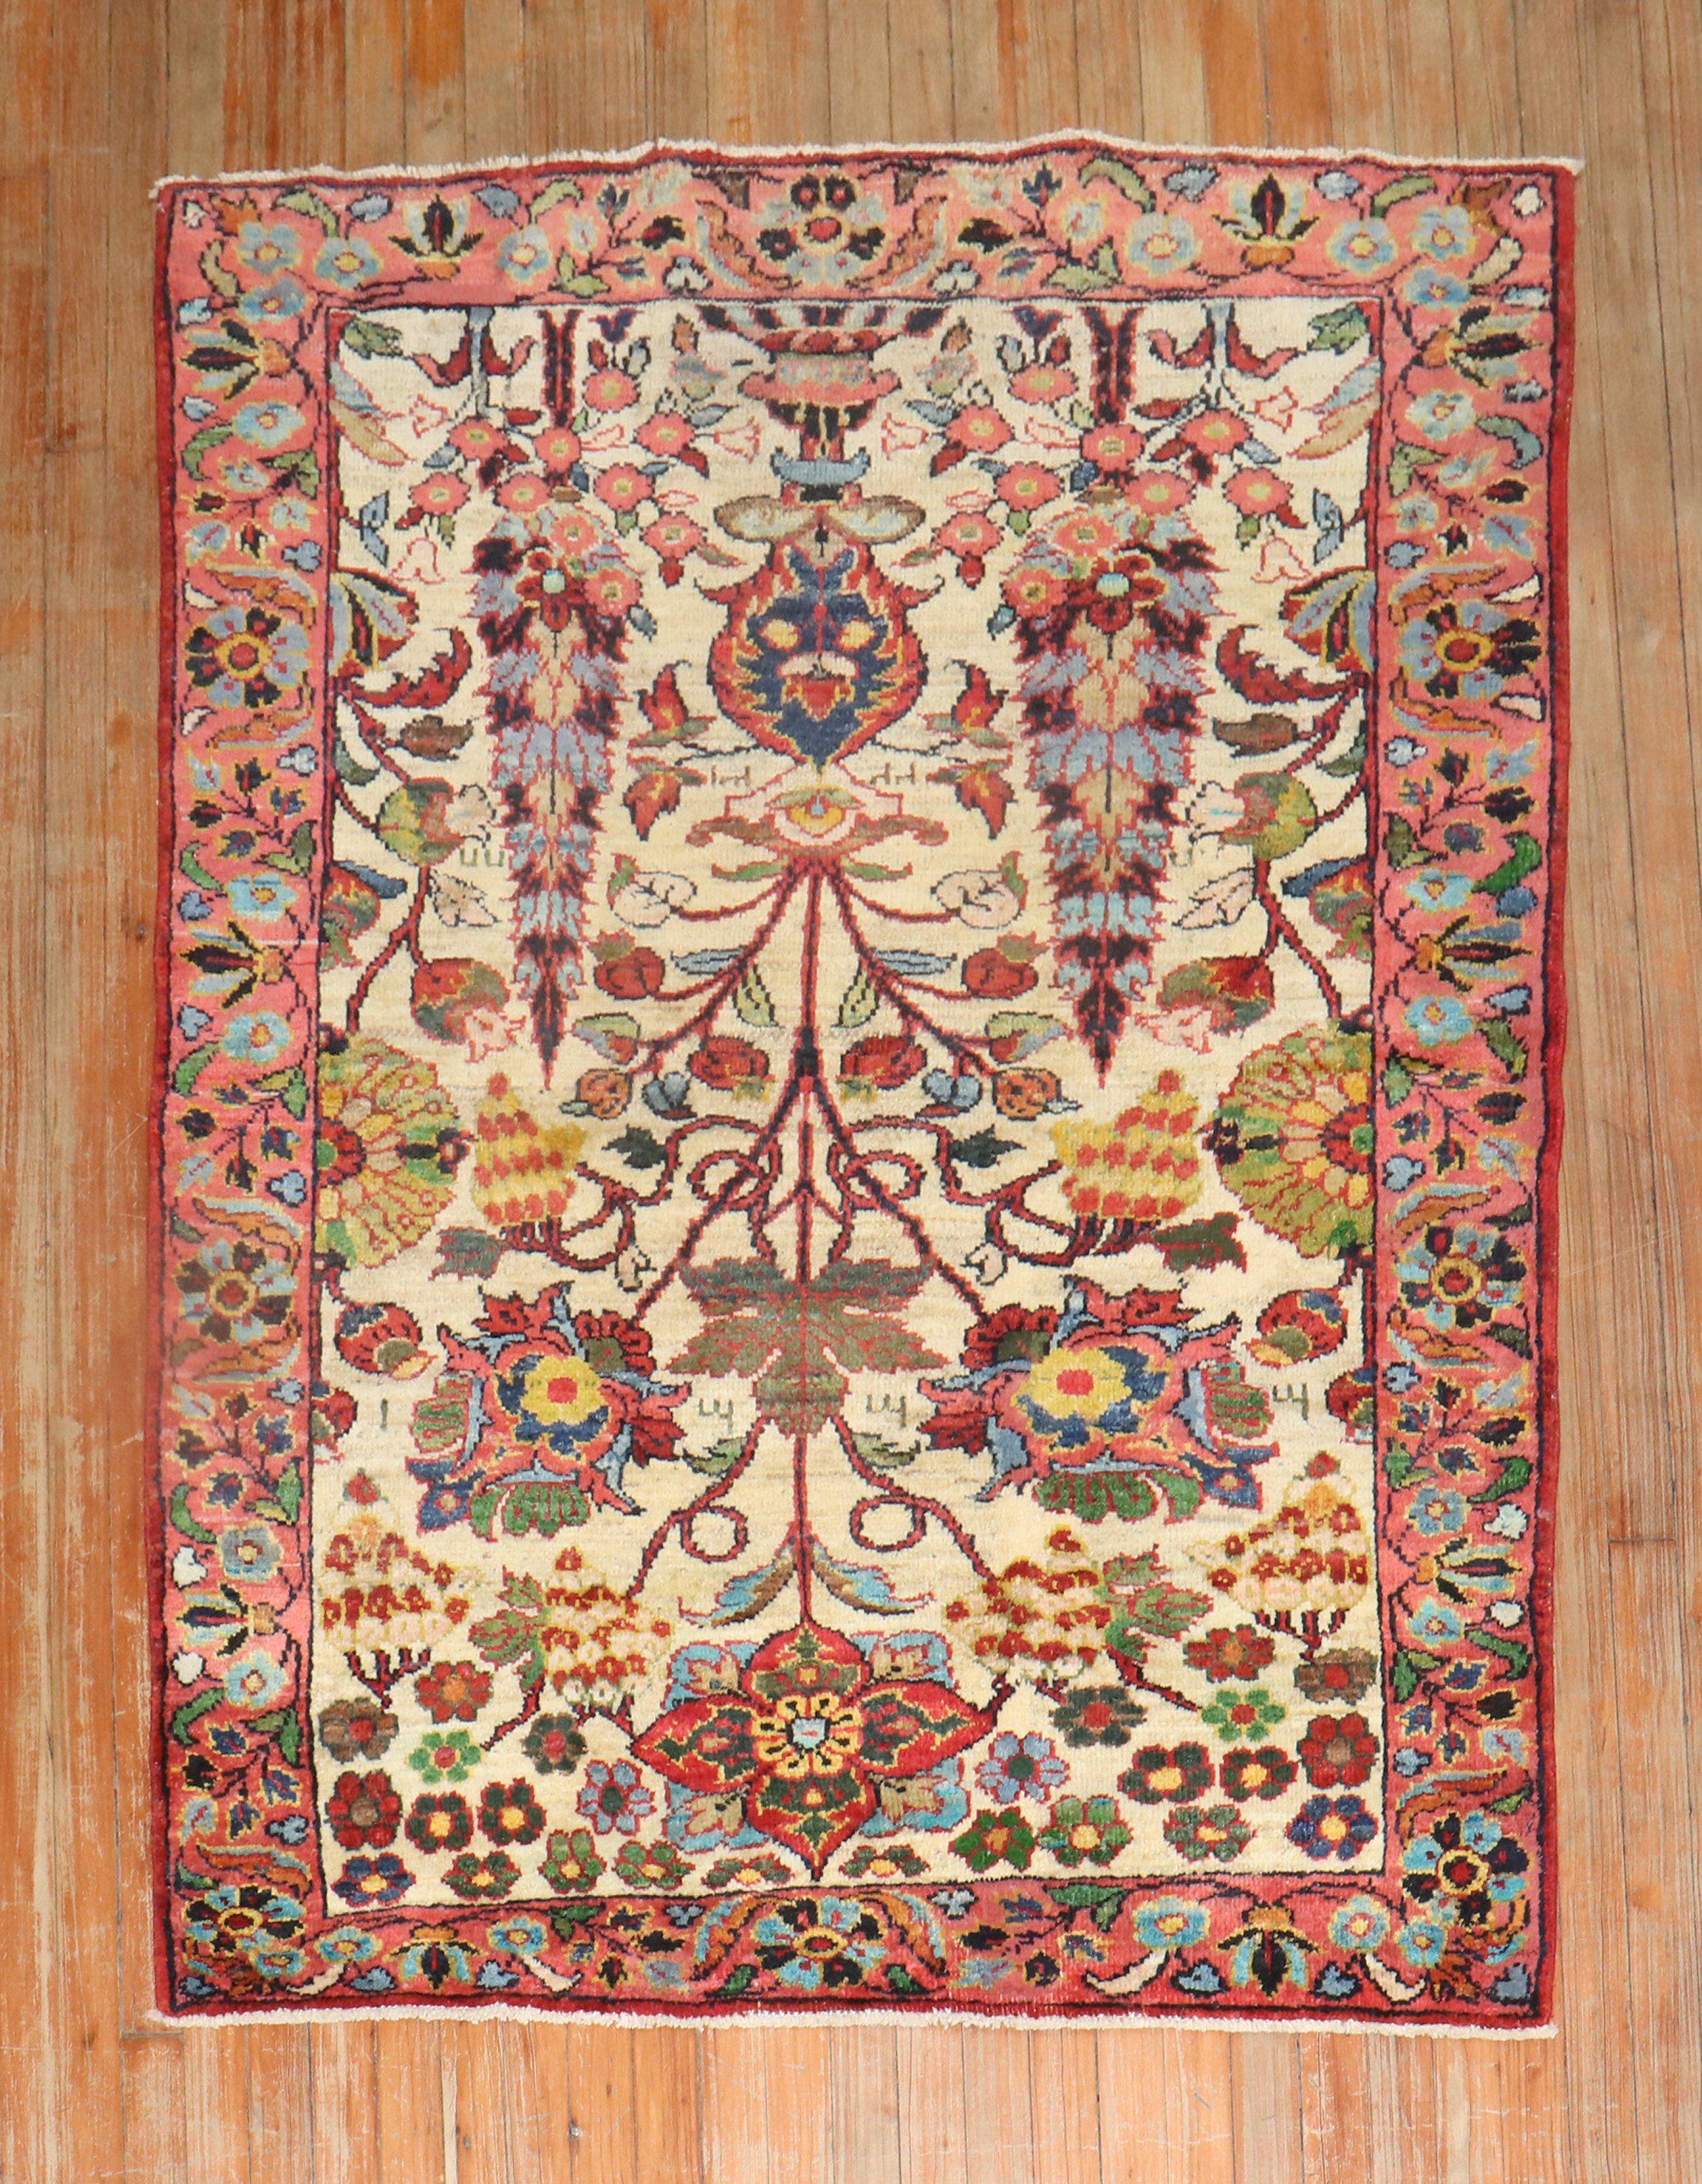 A mid 20th Century Turkish Anatolian Rug with a jewel-toned colorful floral design resembling rugs from the Persian Bakhtiari Village.

Measures: 4'2''x 5'9''.